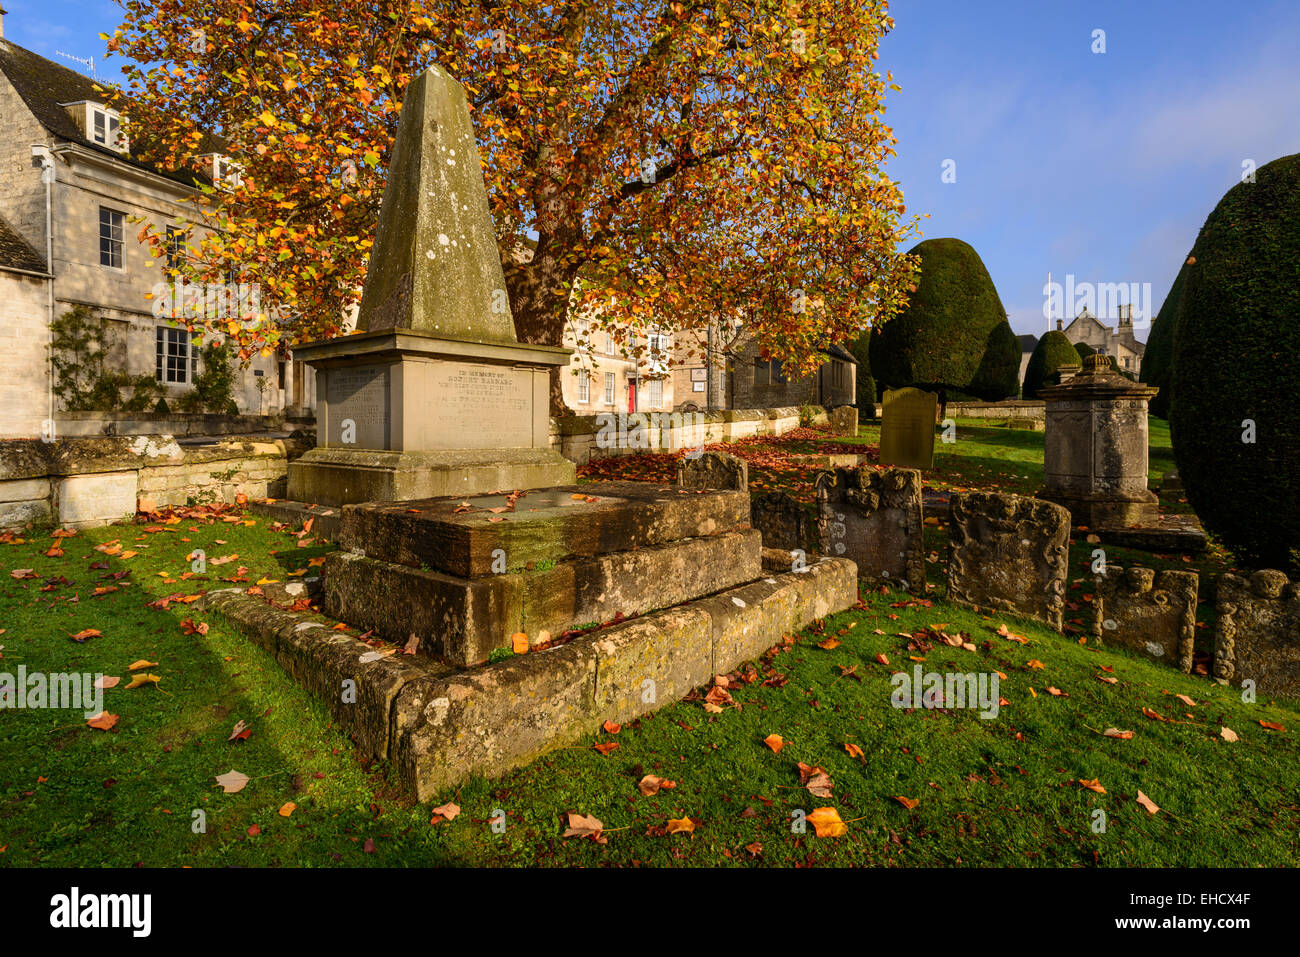 Cotswold stone buildings and St Mary's Churchyard in autumn, Painswick, Gloucestershire, UK Stock Photo